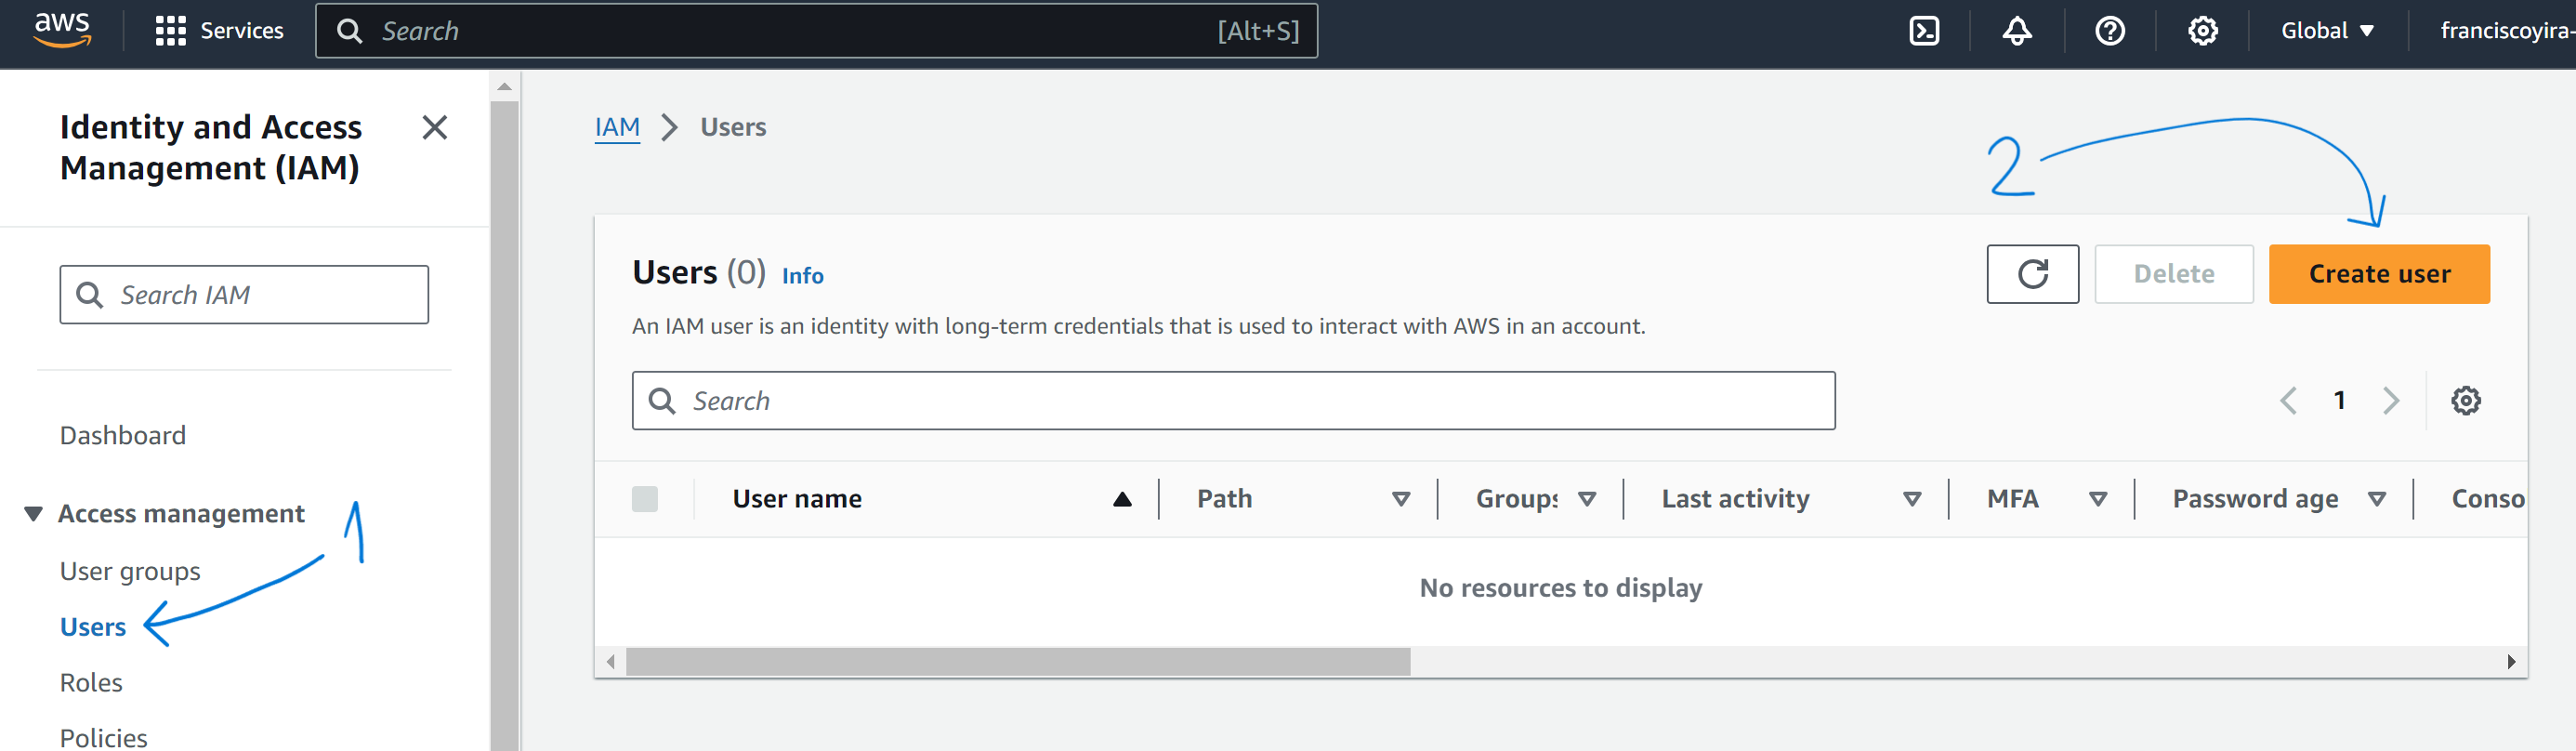 Screenshot of AWS IAM dashboard with a focus on the ‘Users’ section, indicating zero users created and highlighting the ‘Create user’ button